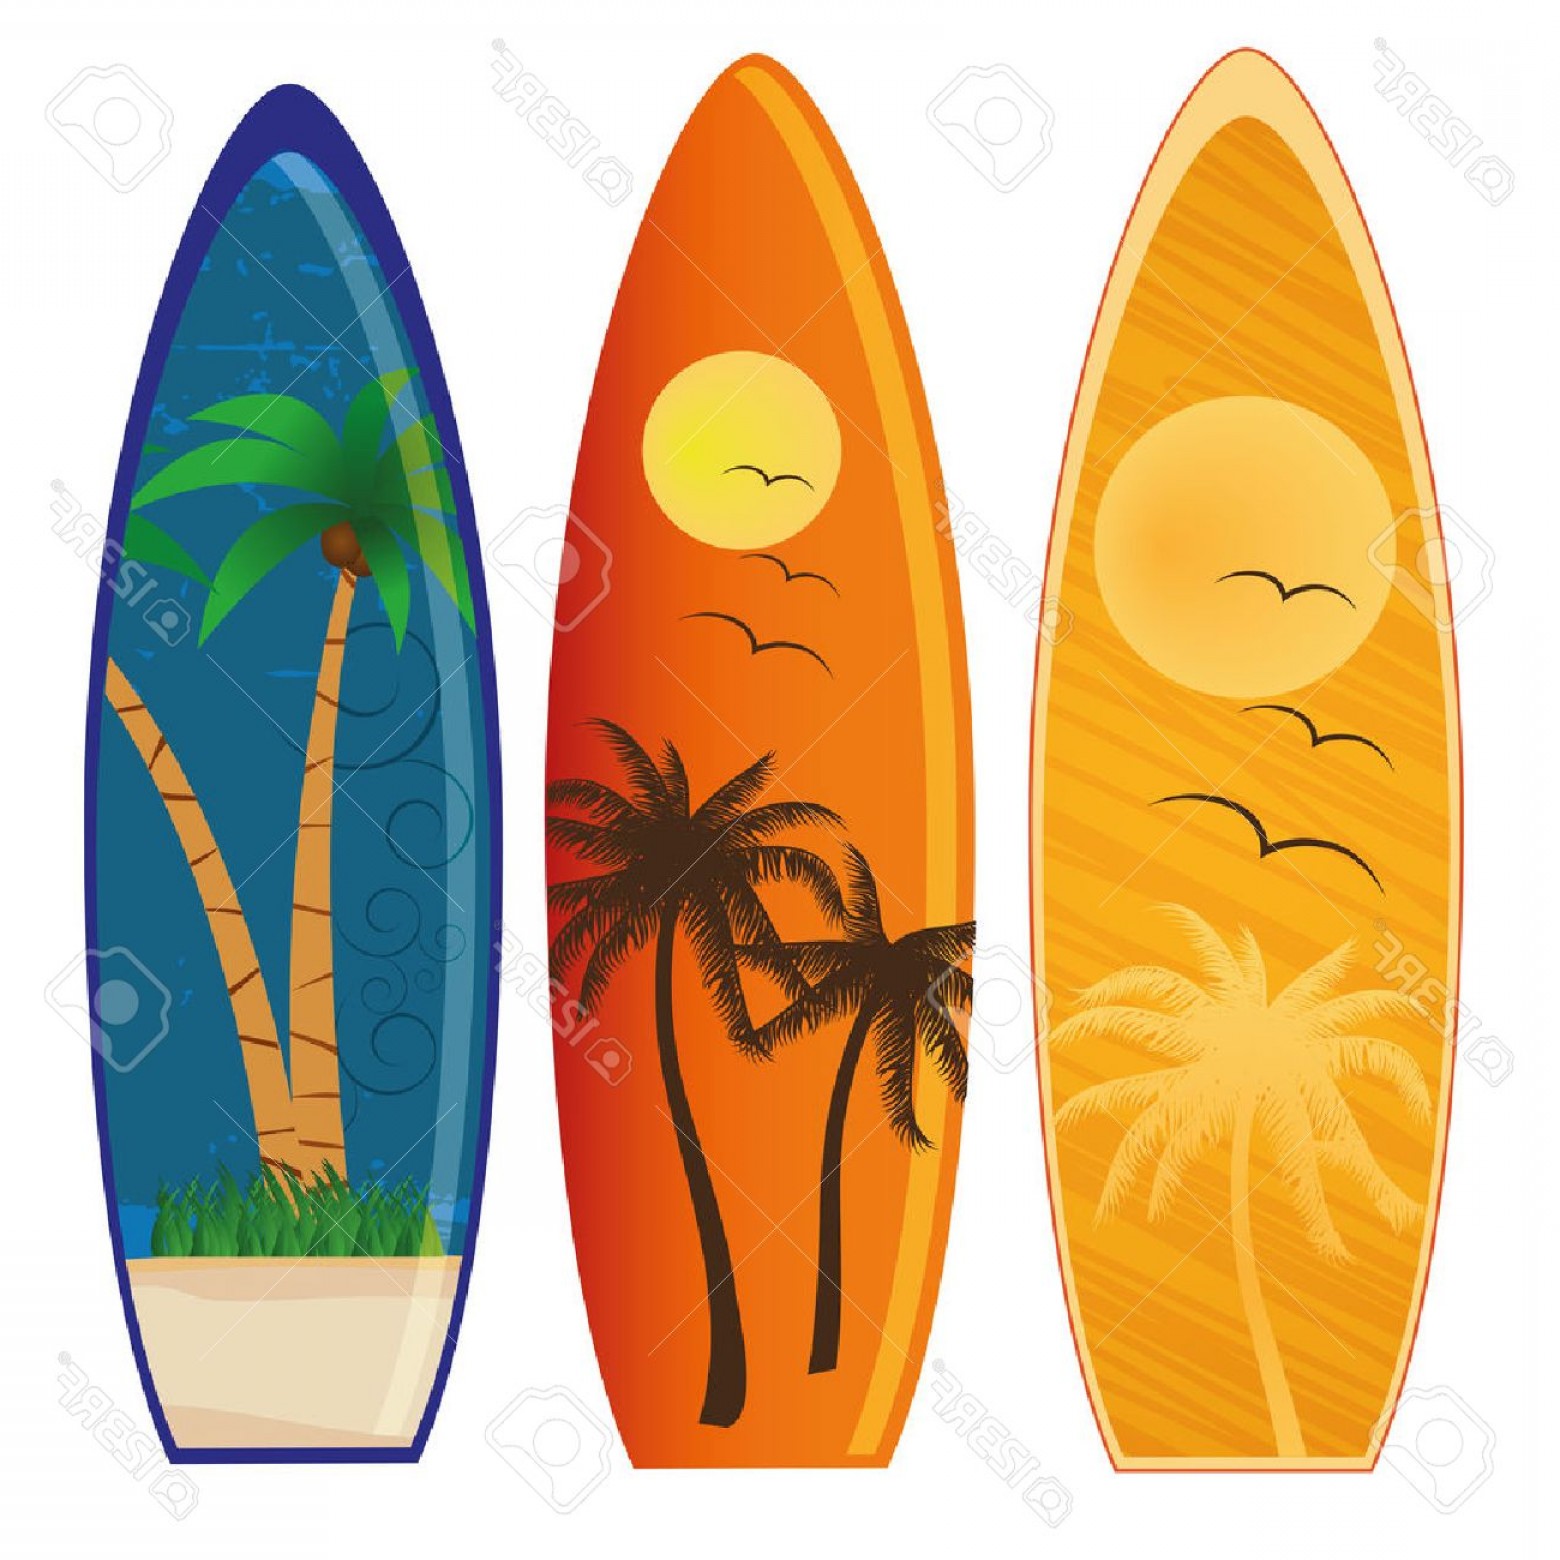 Photothree Colored Surfboards With Different Styles And